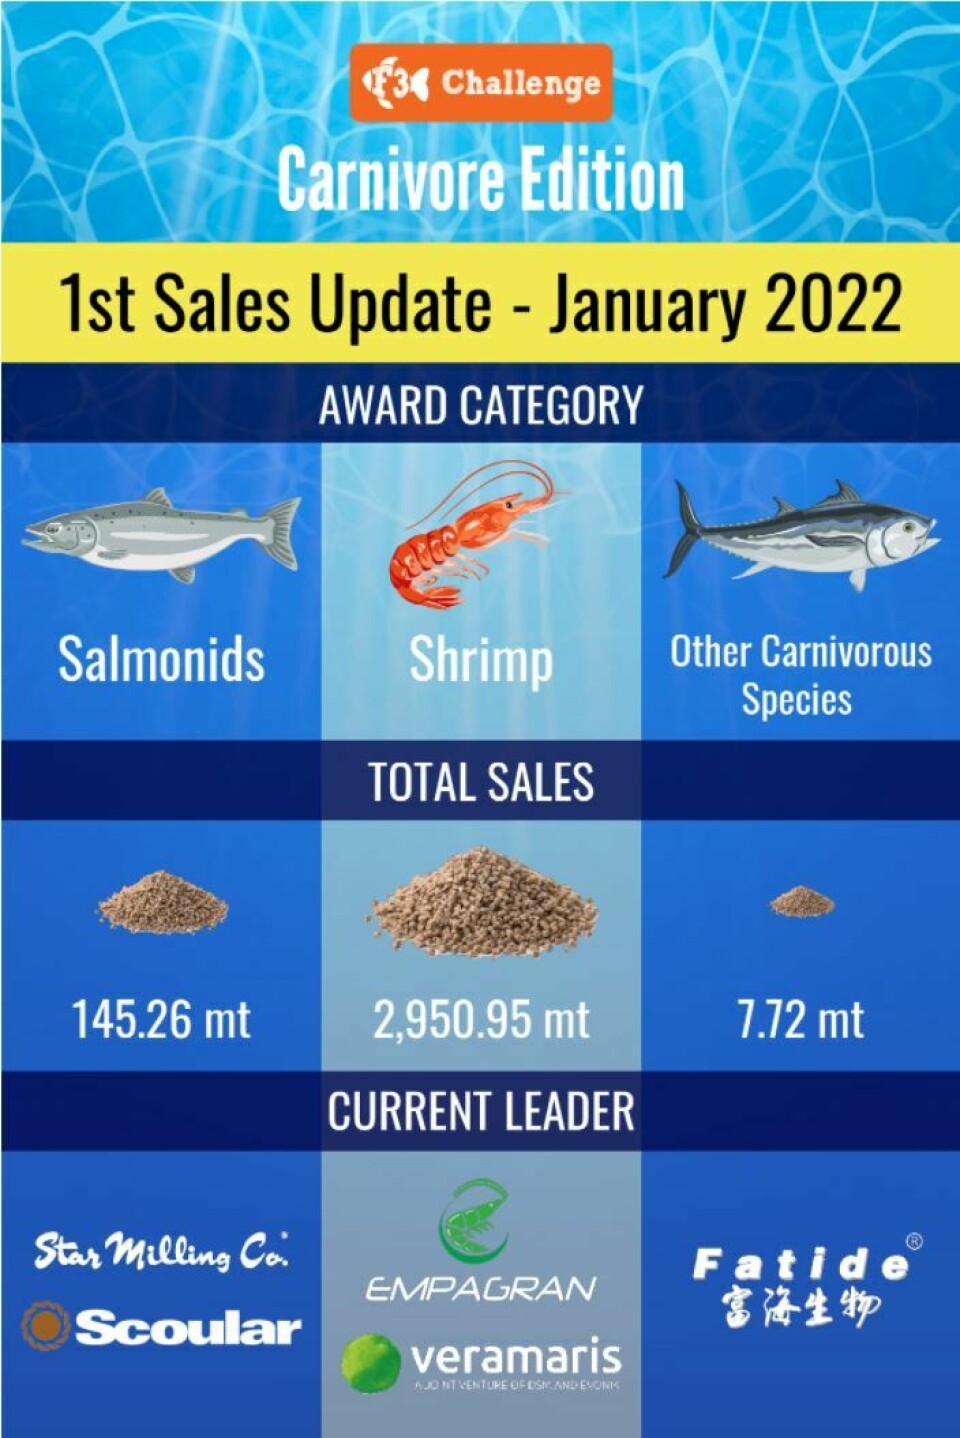 The amount of fish-feed feed sold by contestants in the last quarter of 2021. Click on image to enlarge.